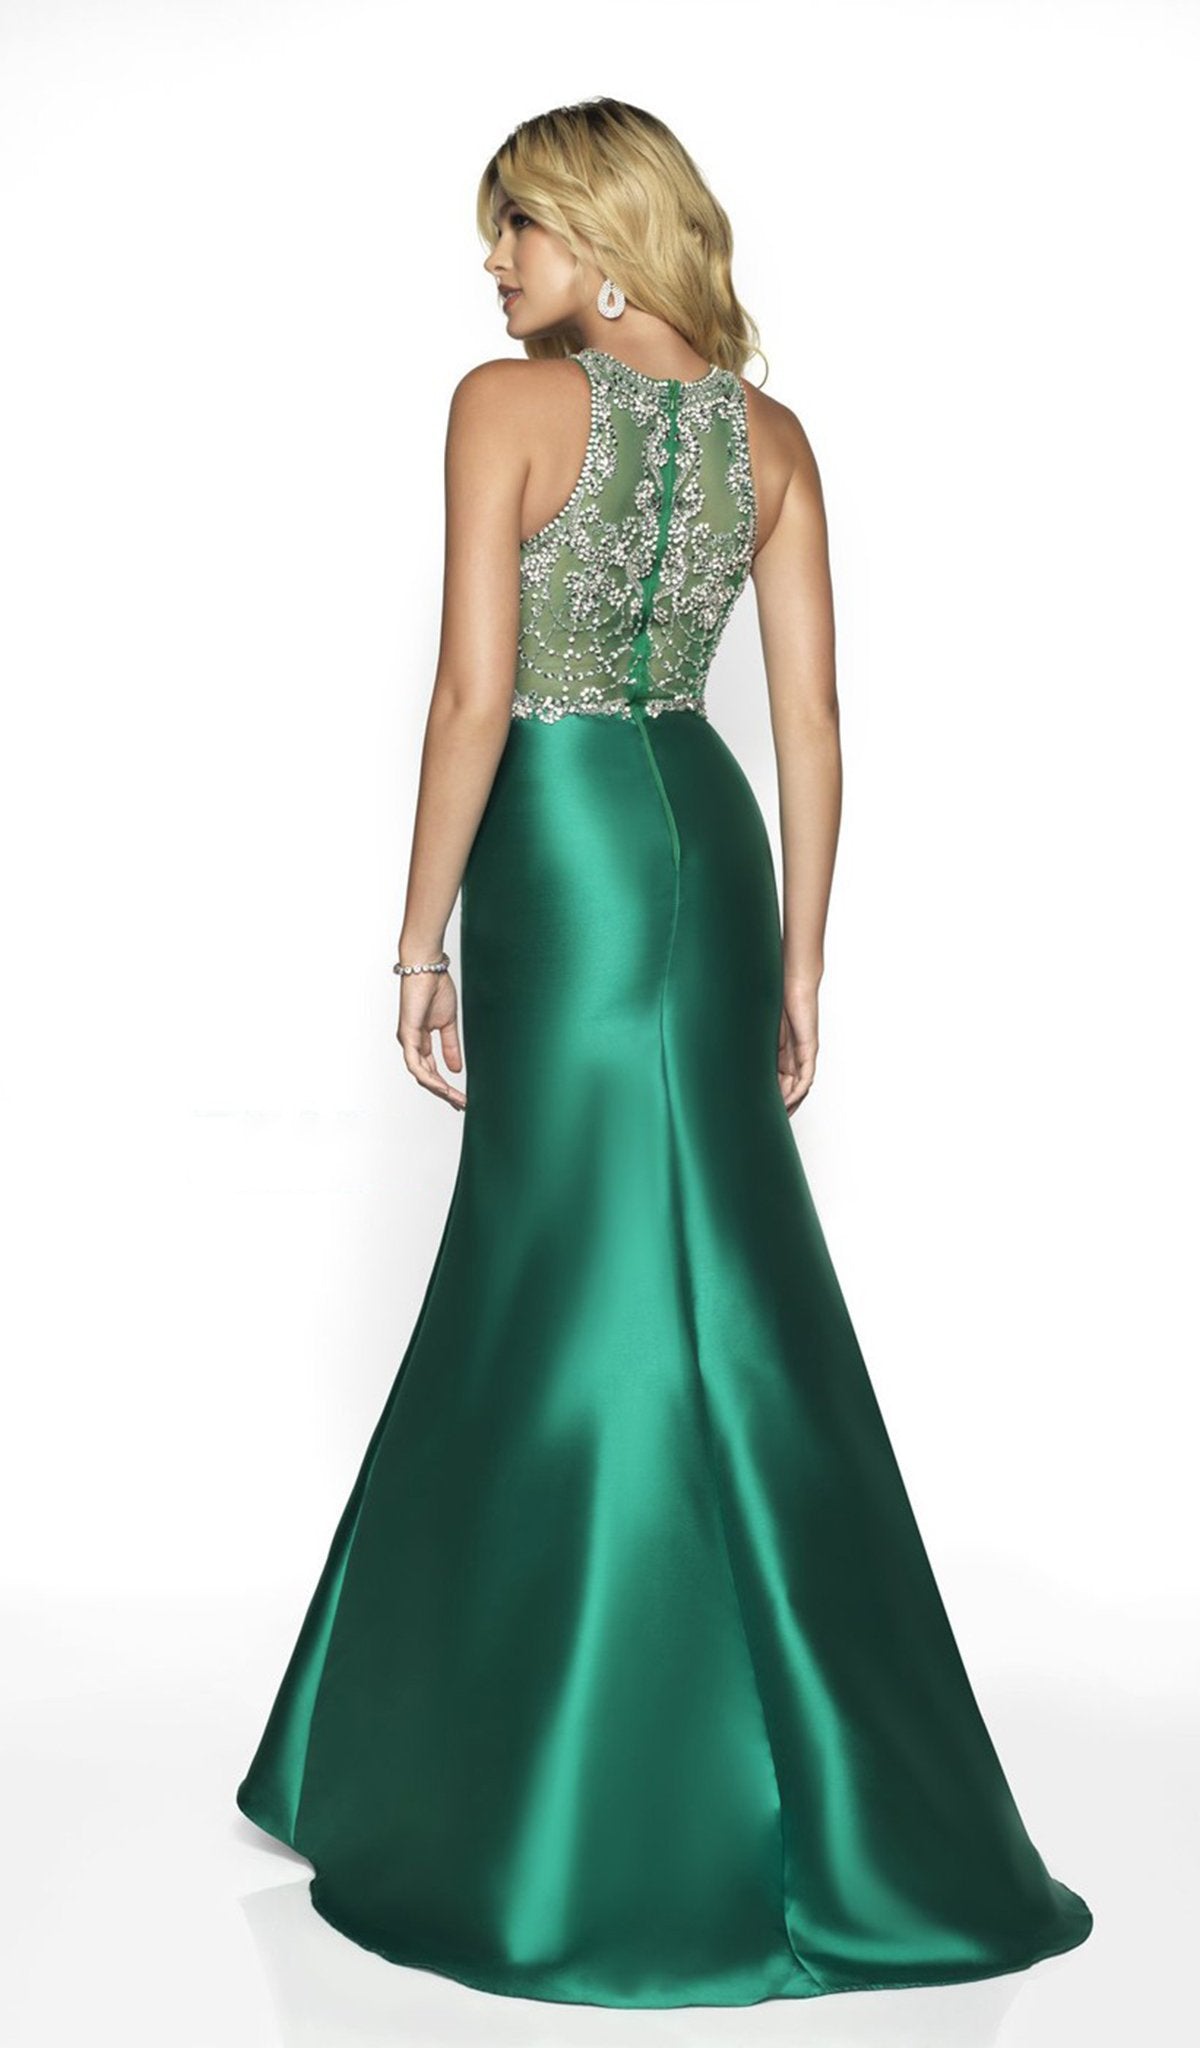 Blush by Alexia Designs - 11784 Beaded Mikado Sleeveless Trumpet Gown In Green